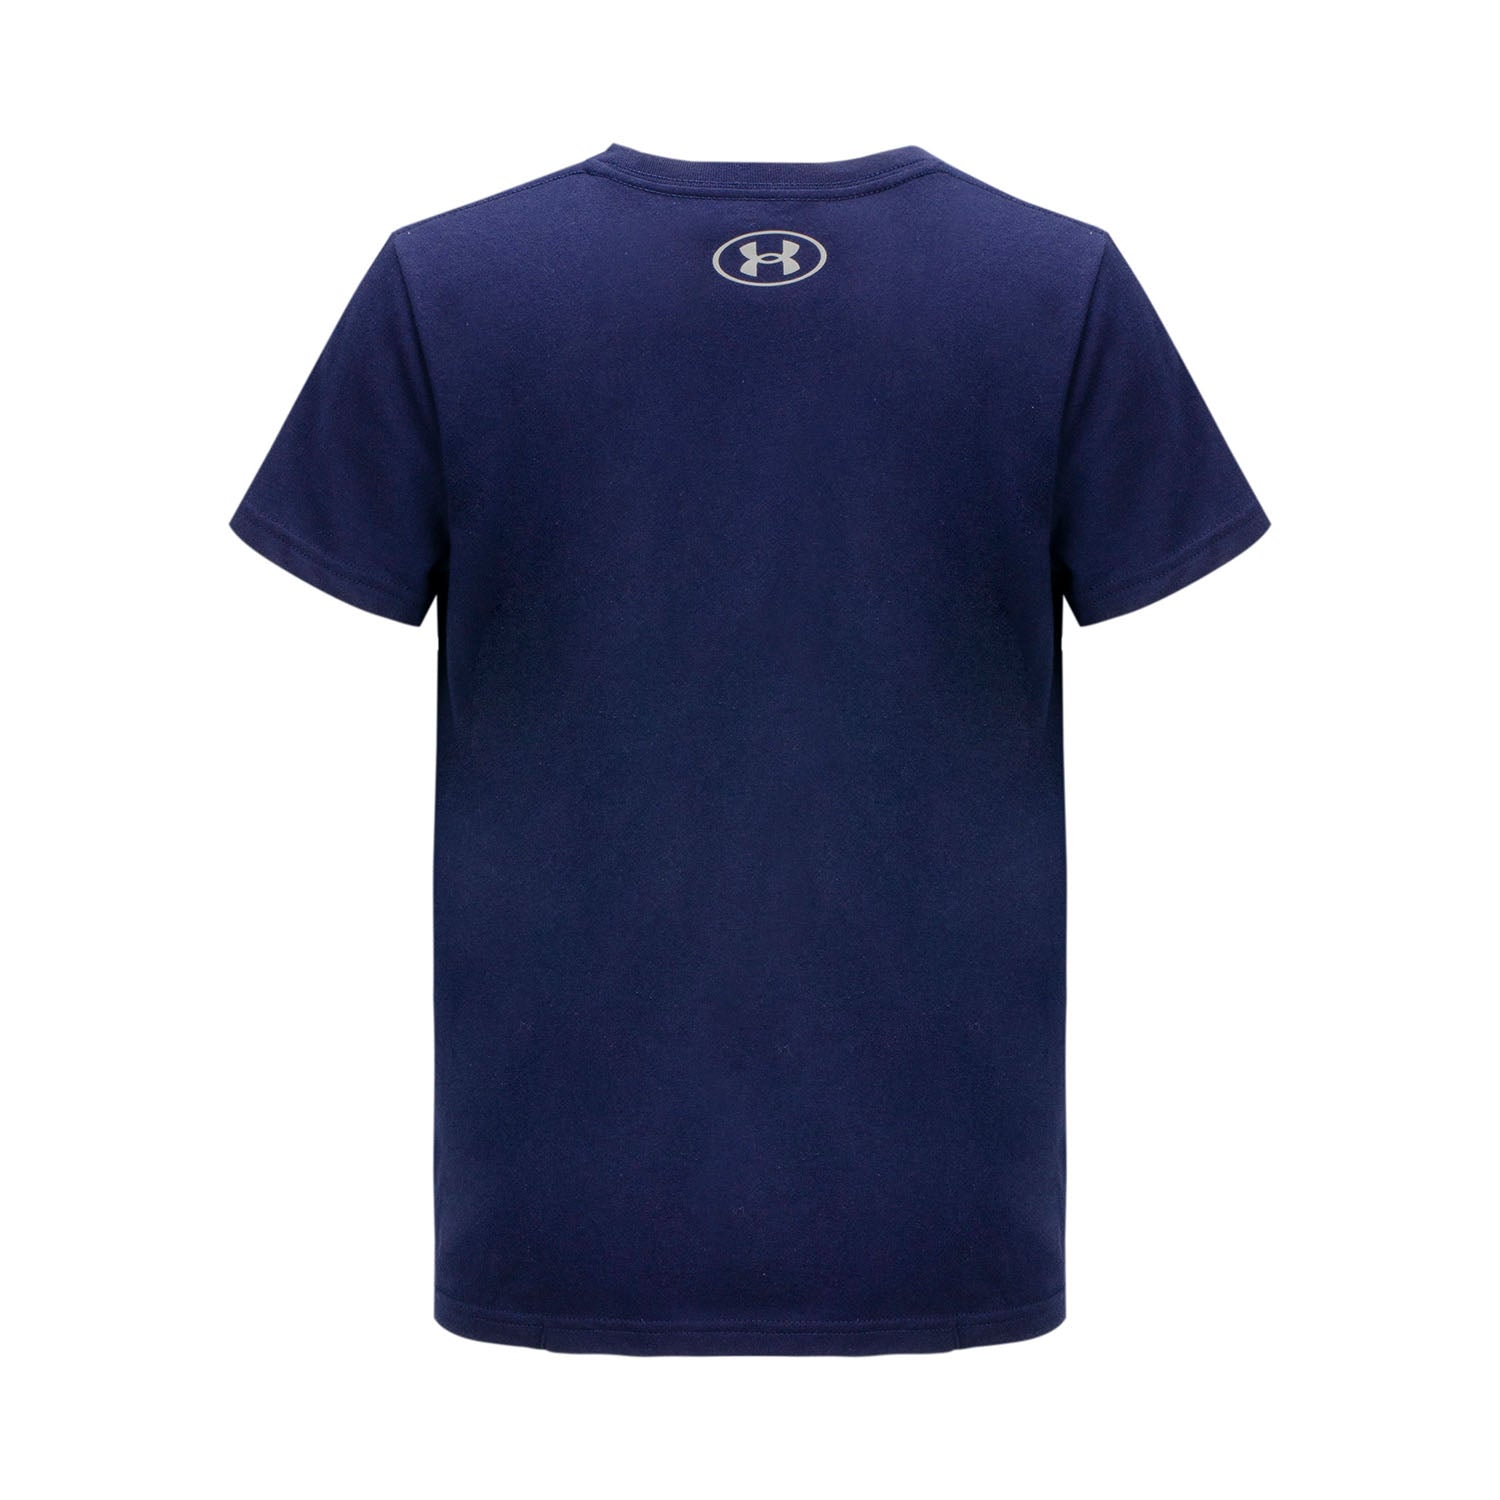 Boys Performance Cotton SS Tee - Navy -Front View